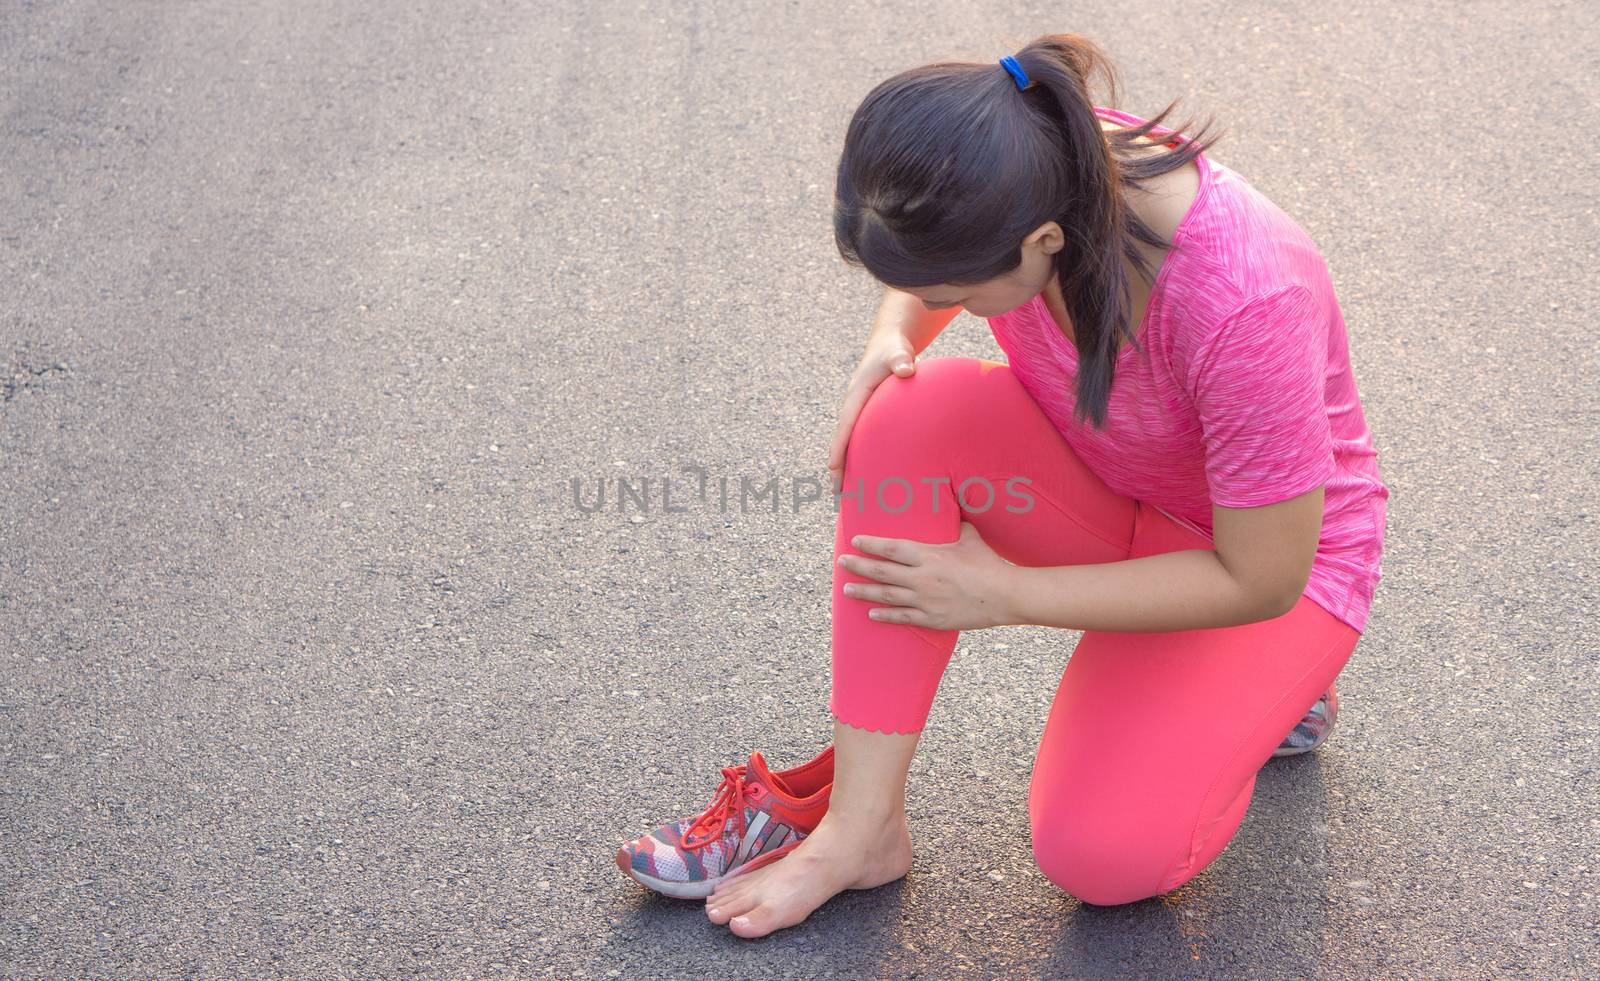 Knee Injuries. Young sport woman holding knee with her hands in pain after suffering muscle injury during a running workout at park. Healthcare and sport concept.